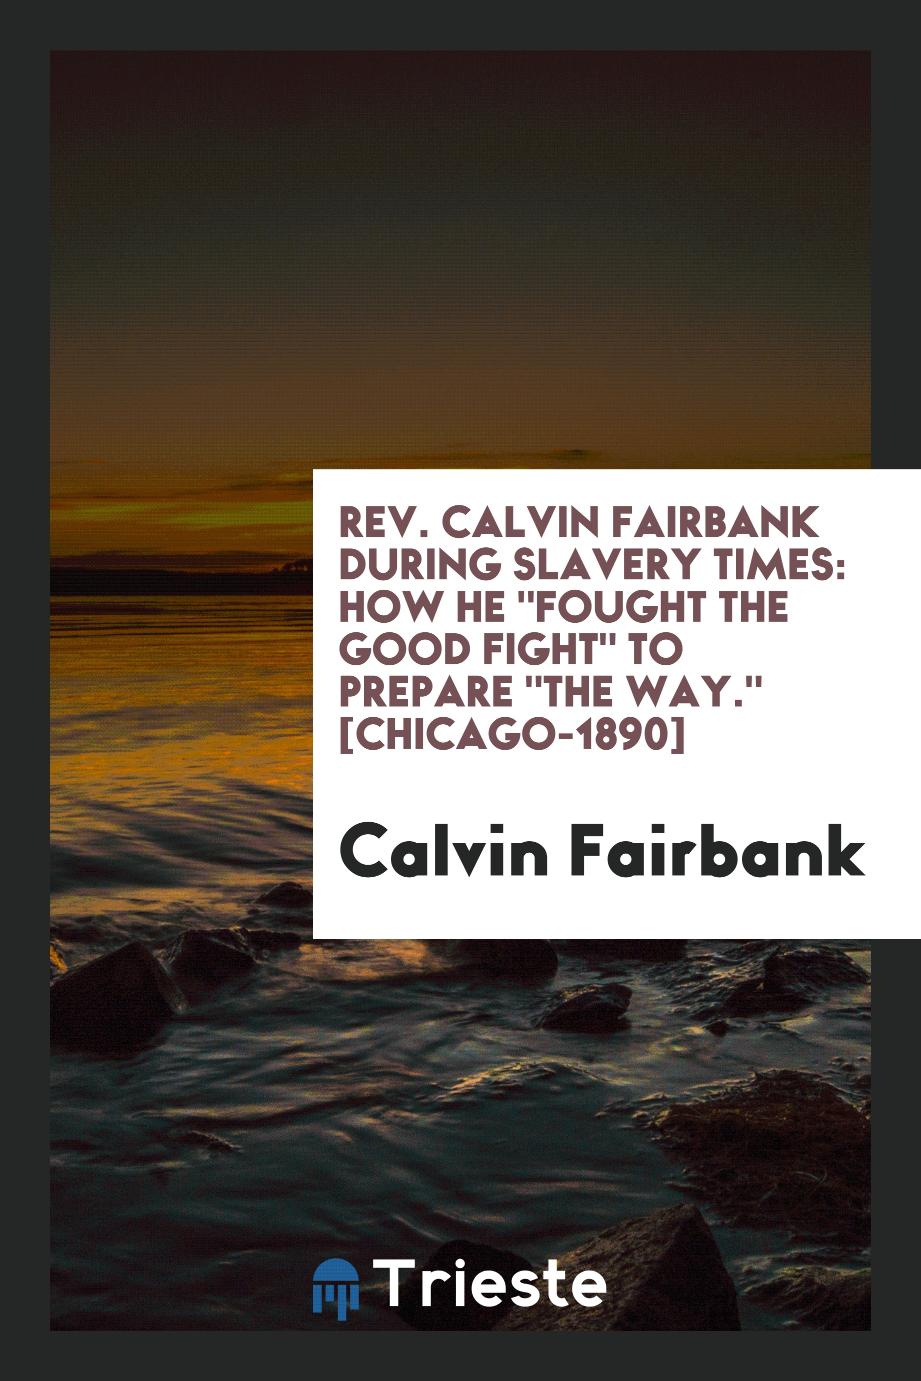 Rev. Calvin Fairbank During Slavery Times: How He "Fought the Good Fight" to Prepare "The Way." [Chicago-1890]